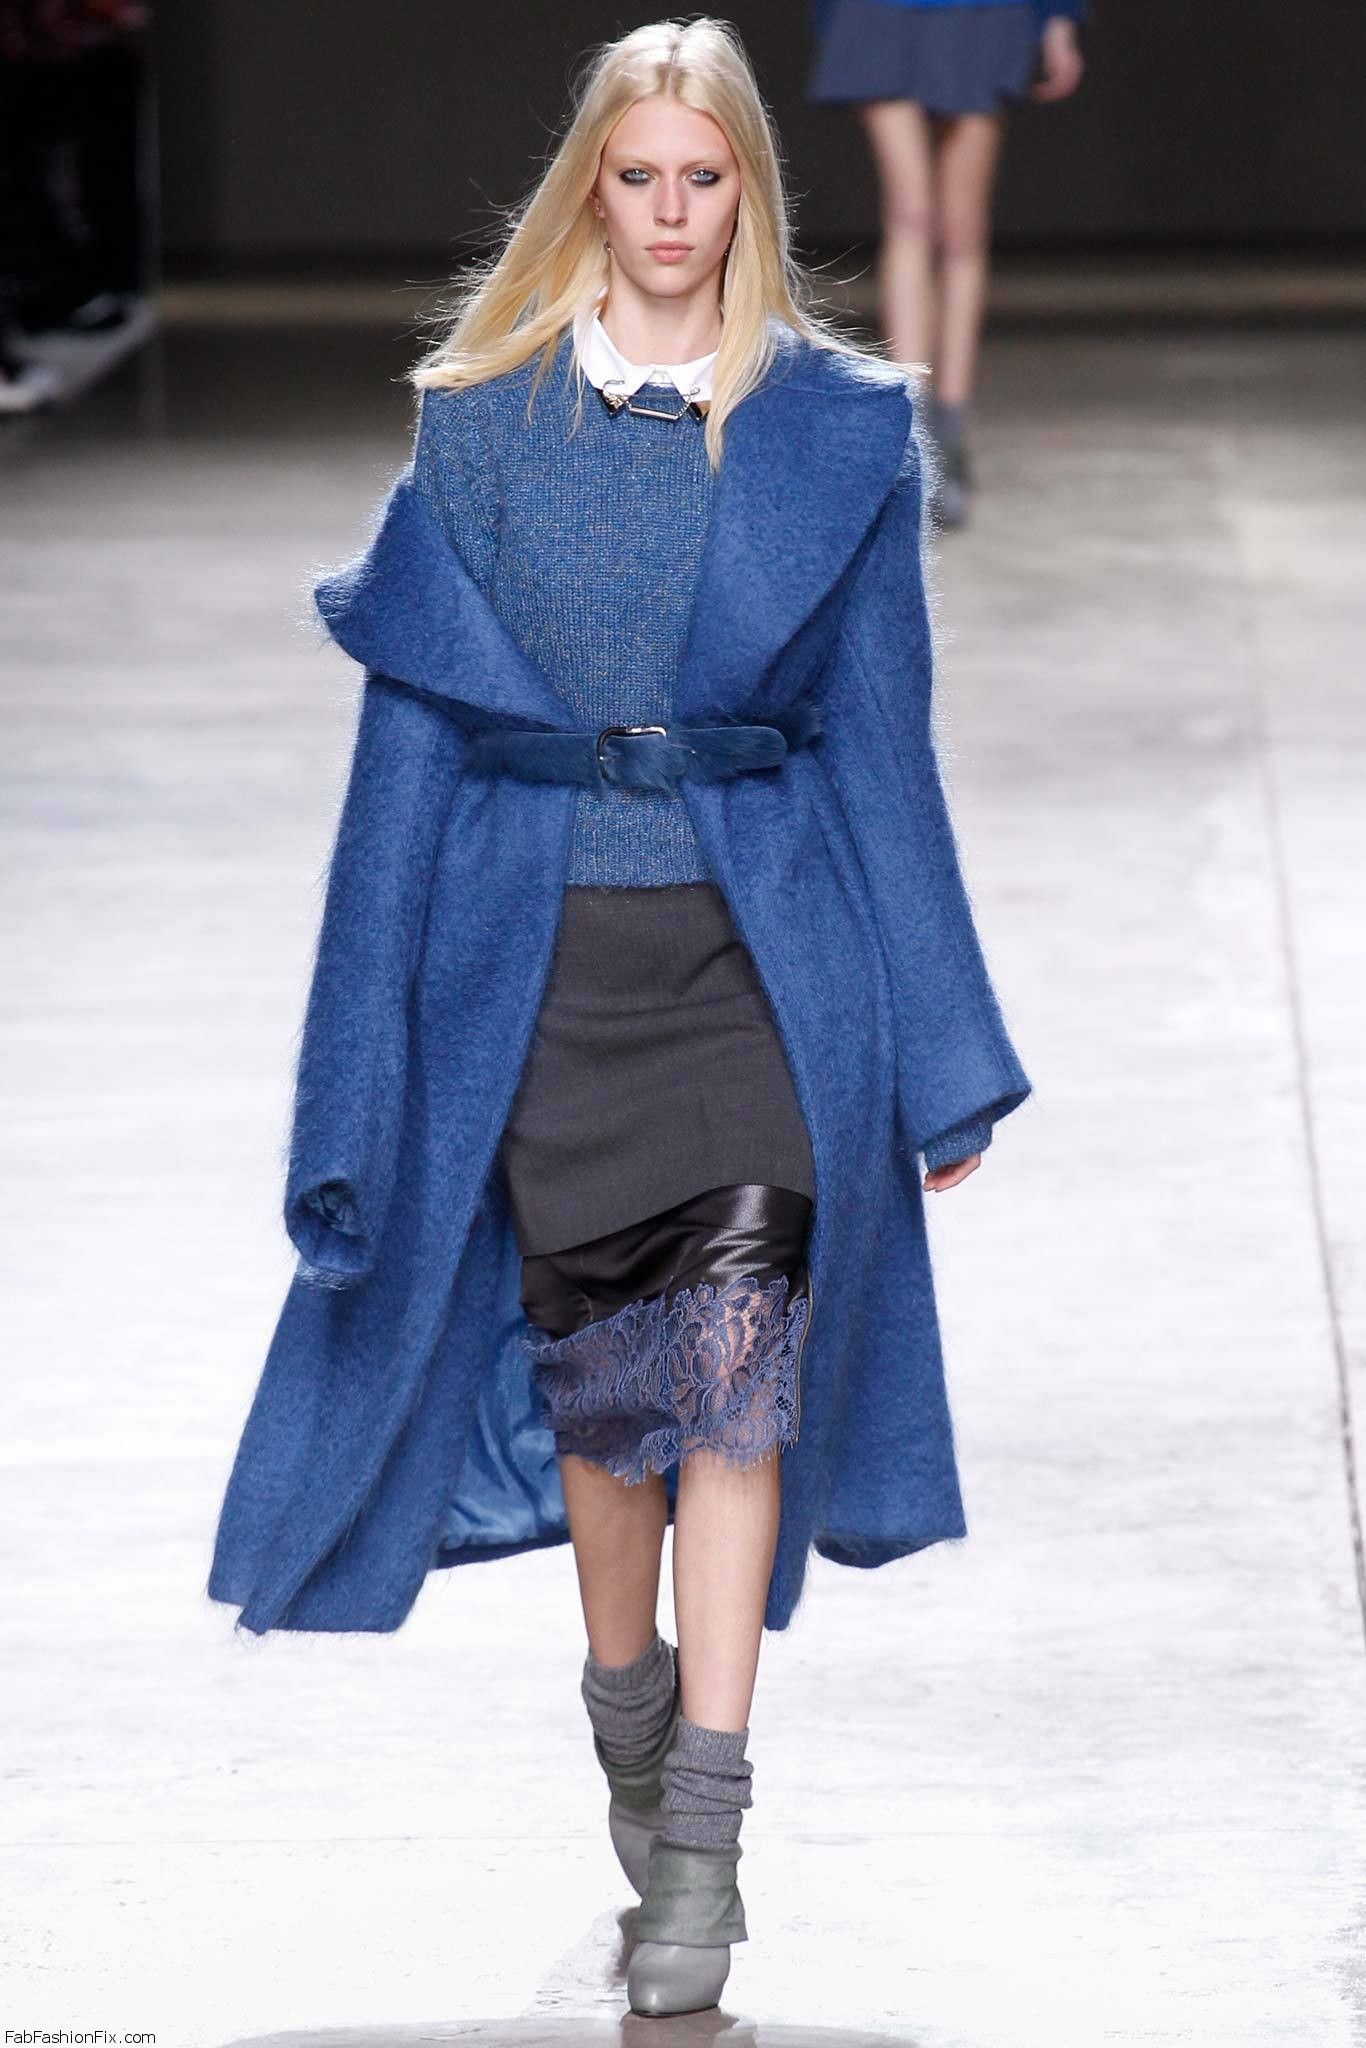 Topshop Unique fall/winter 2014 collection – London fashion week | Fab ...